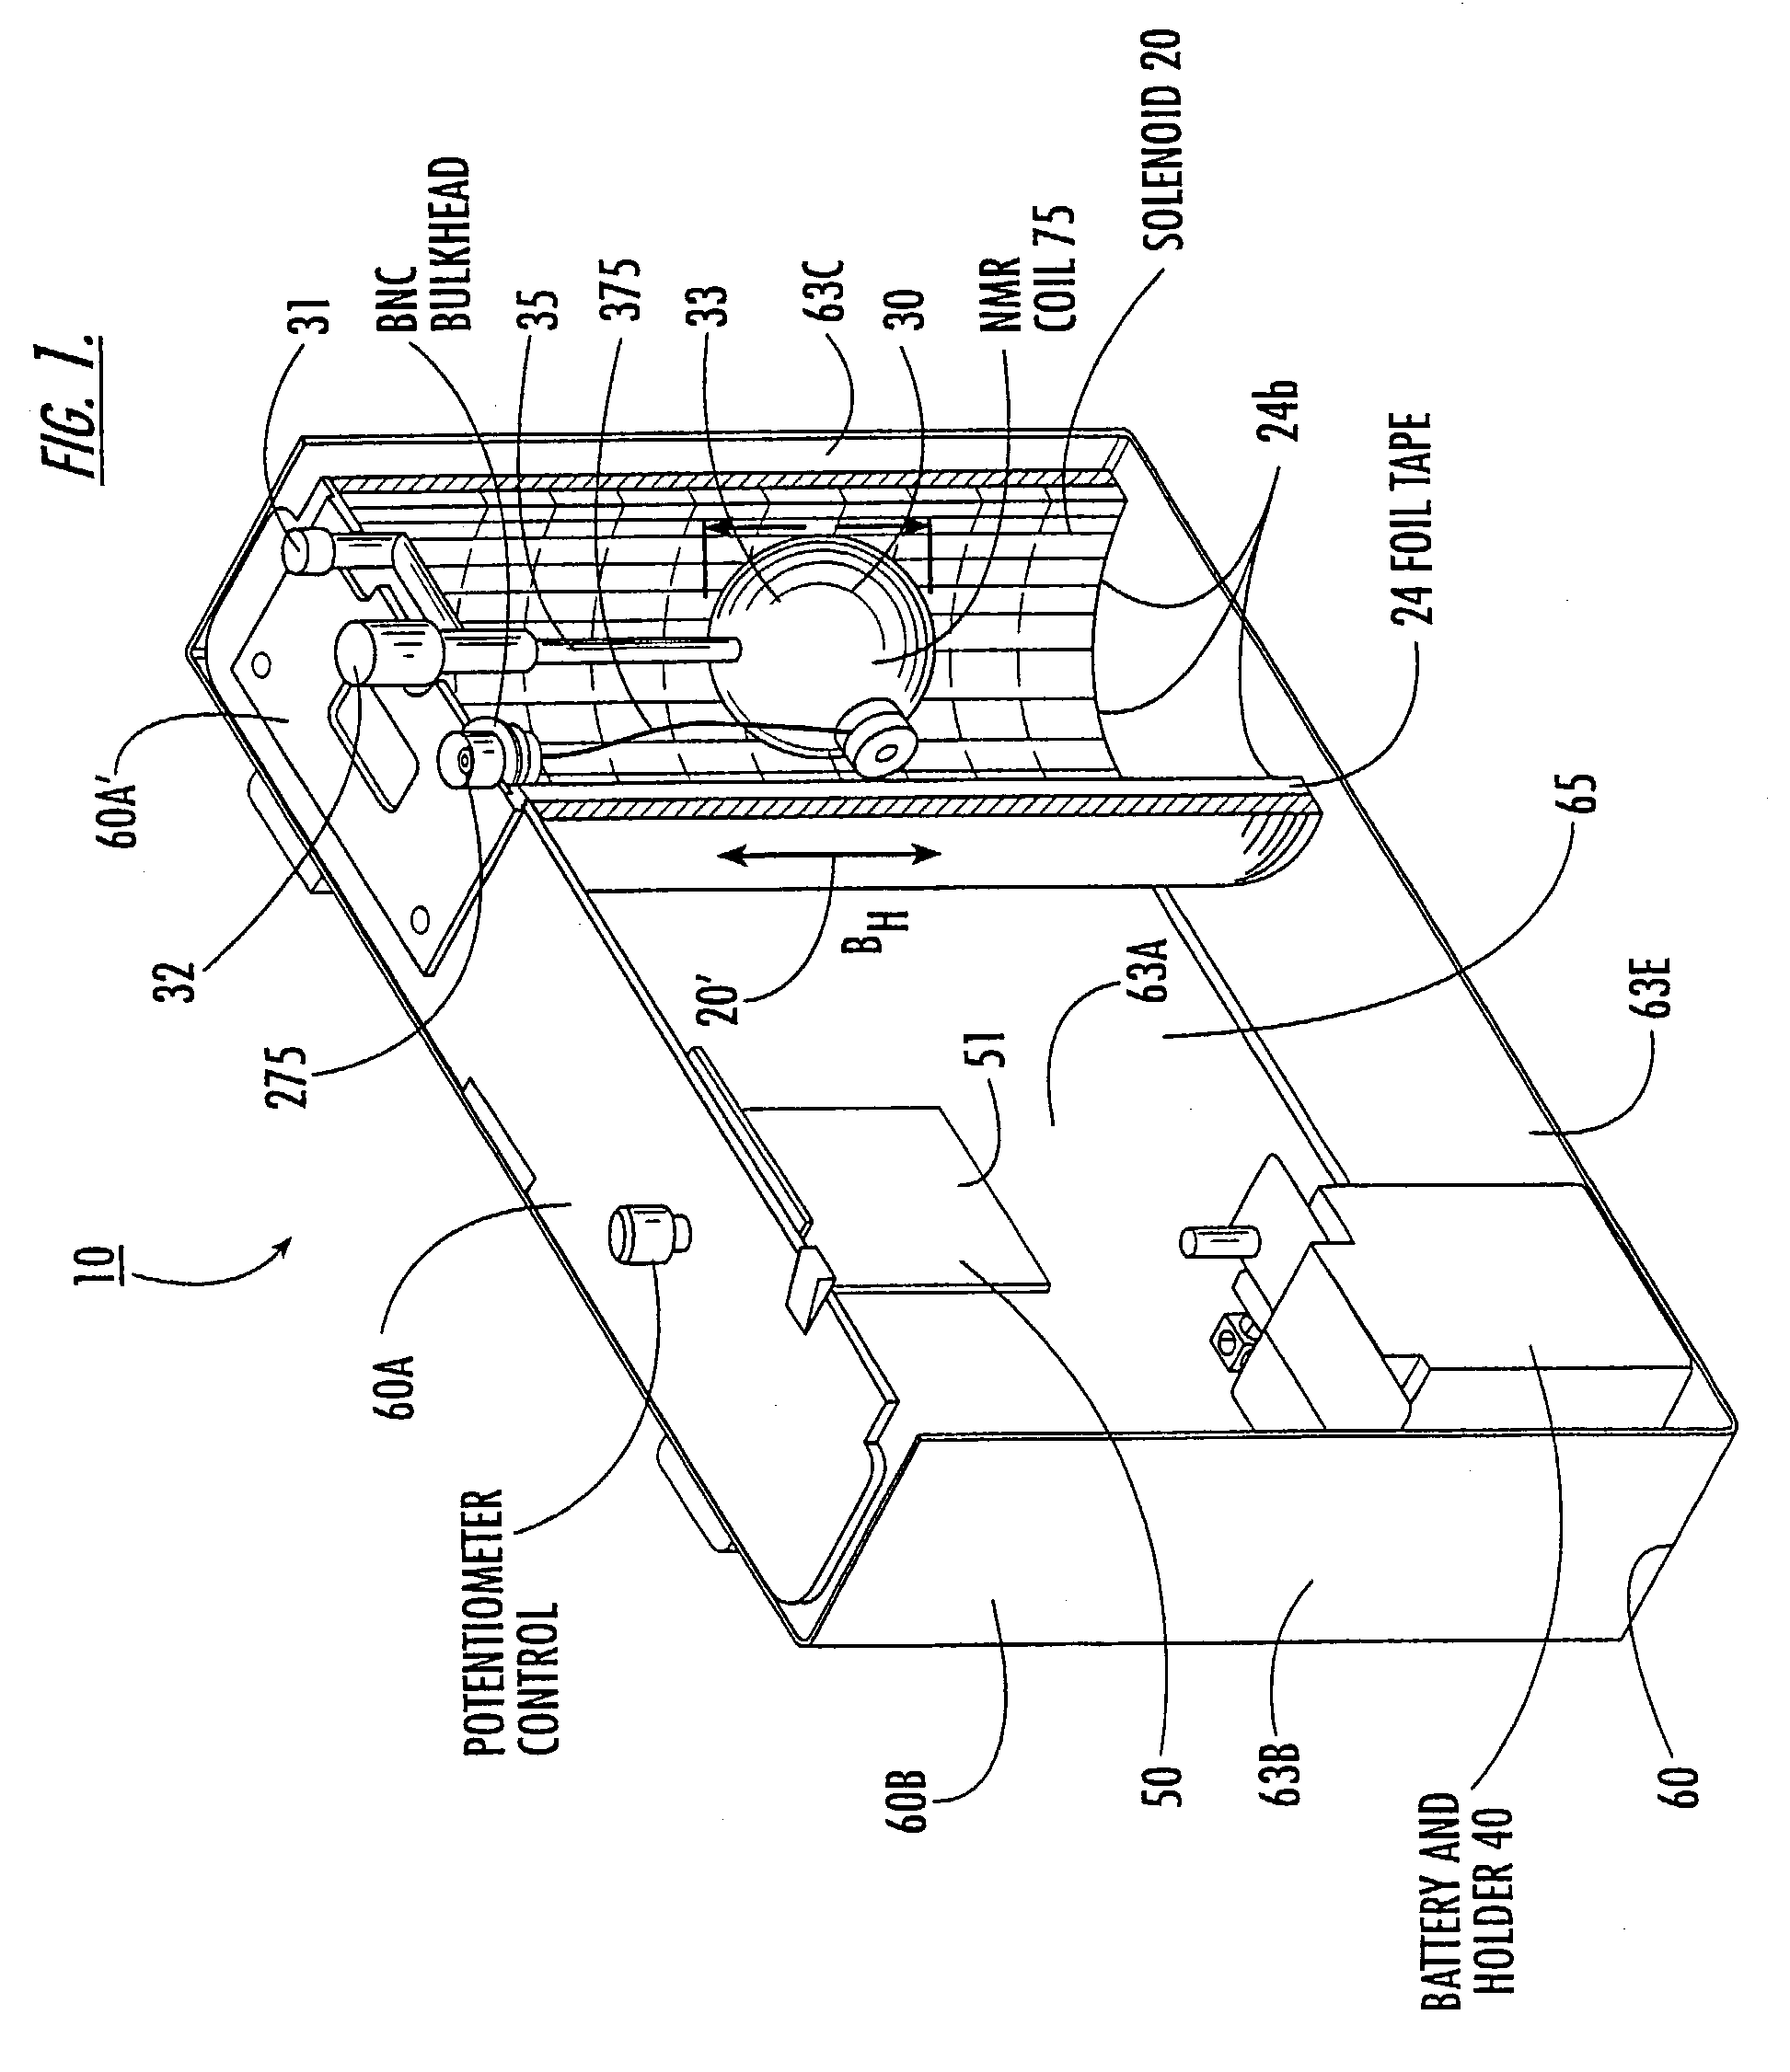 Hyperpolarized gas containers, solenoids, transport and storage devices and associated transport and storage methods